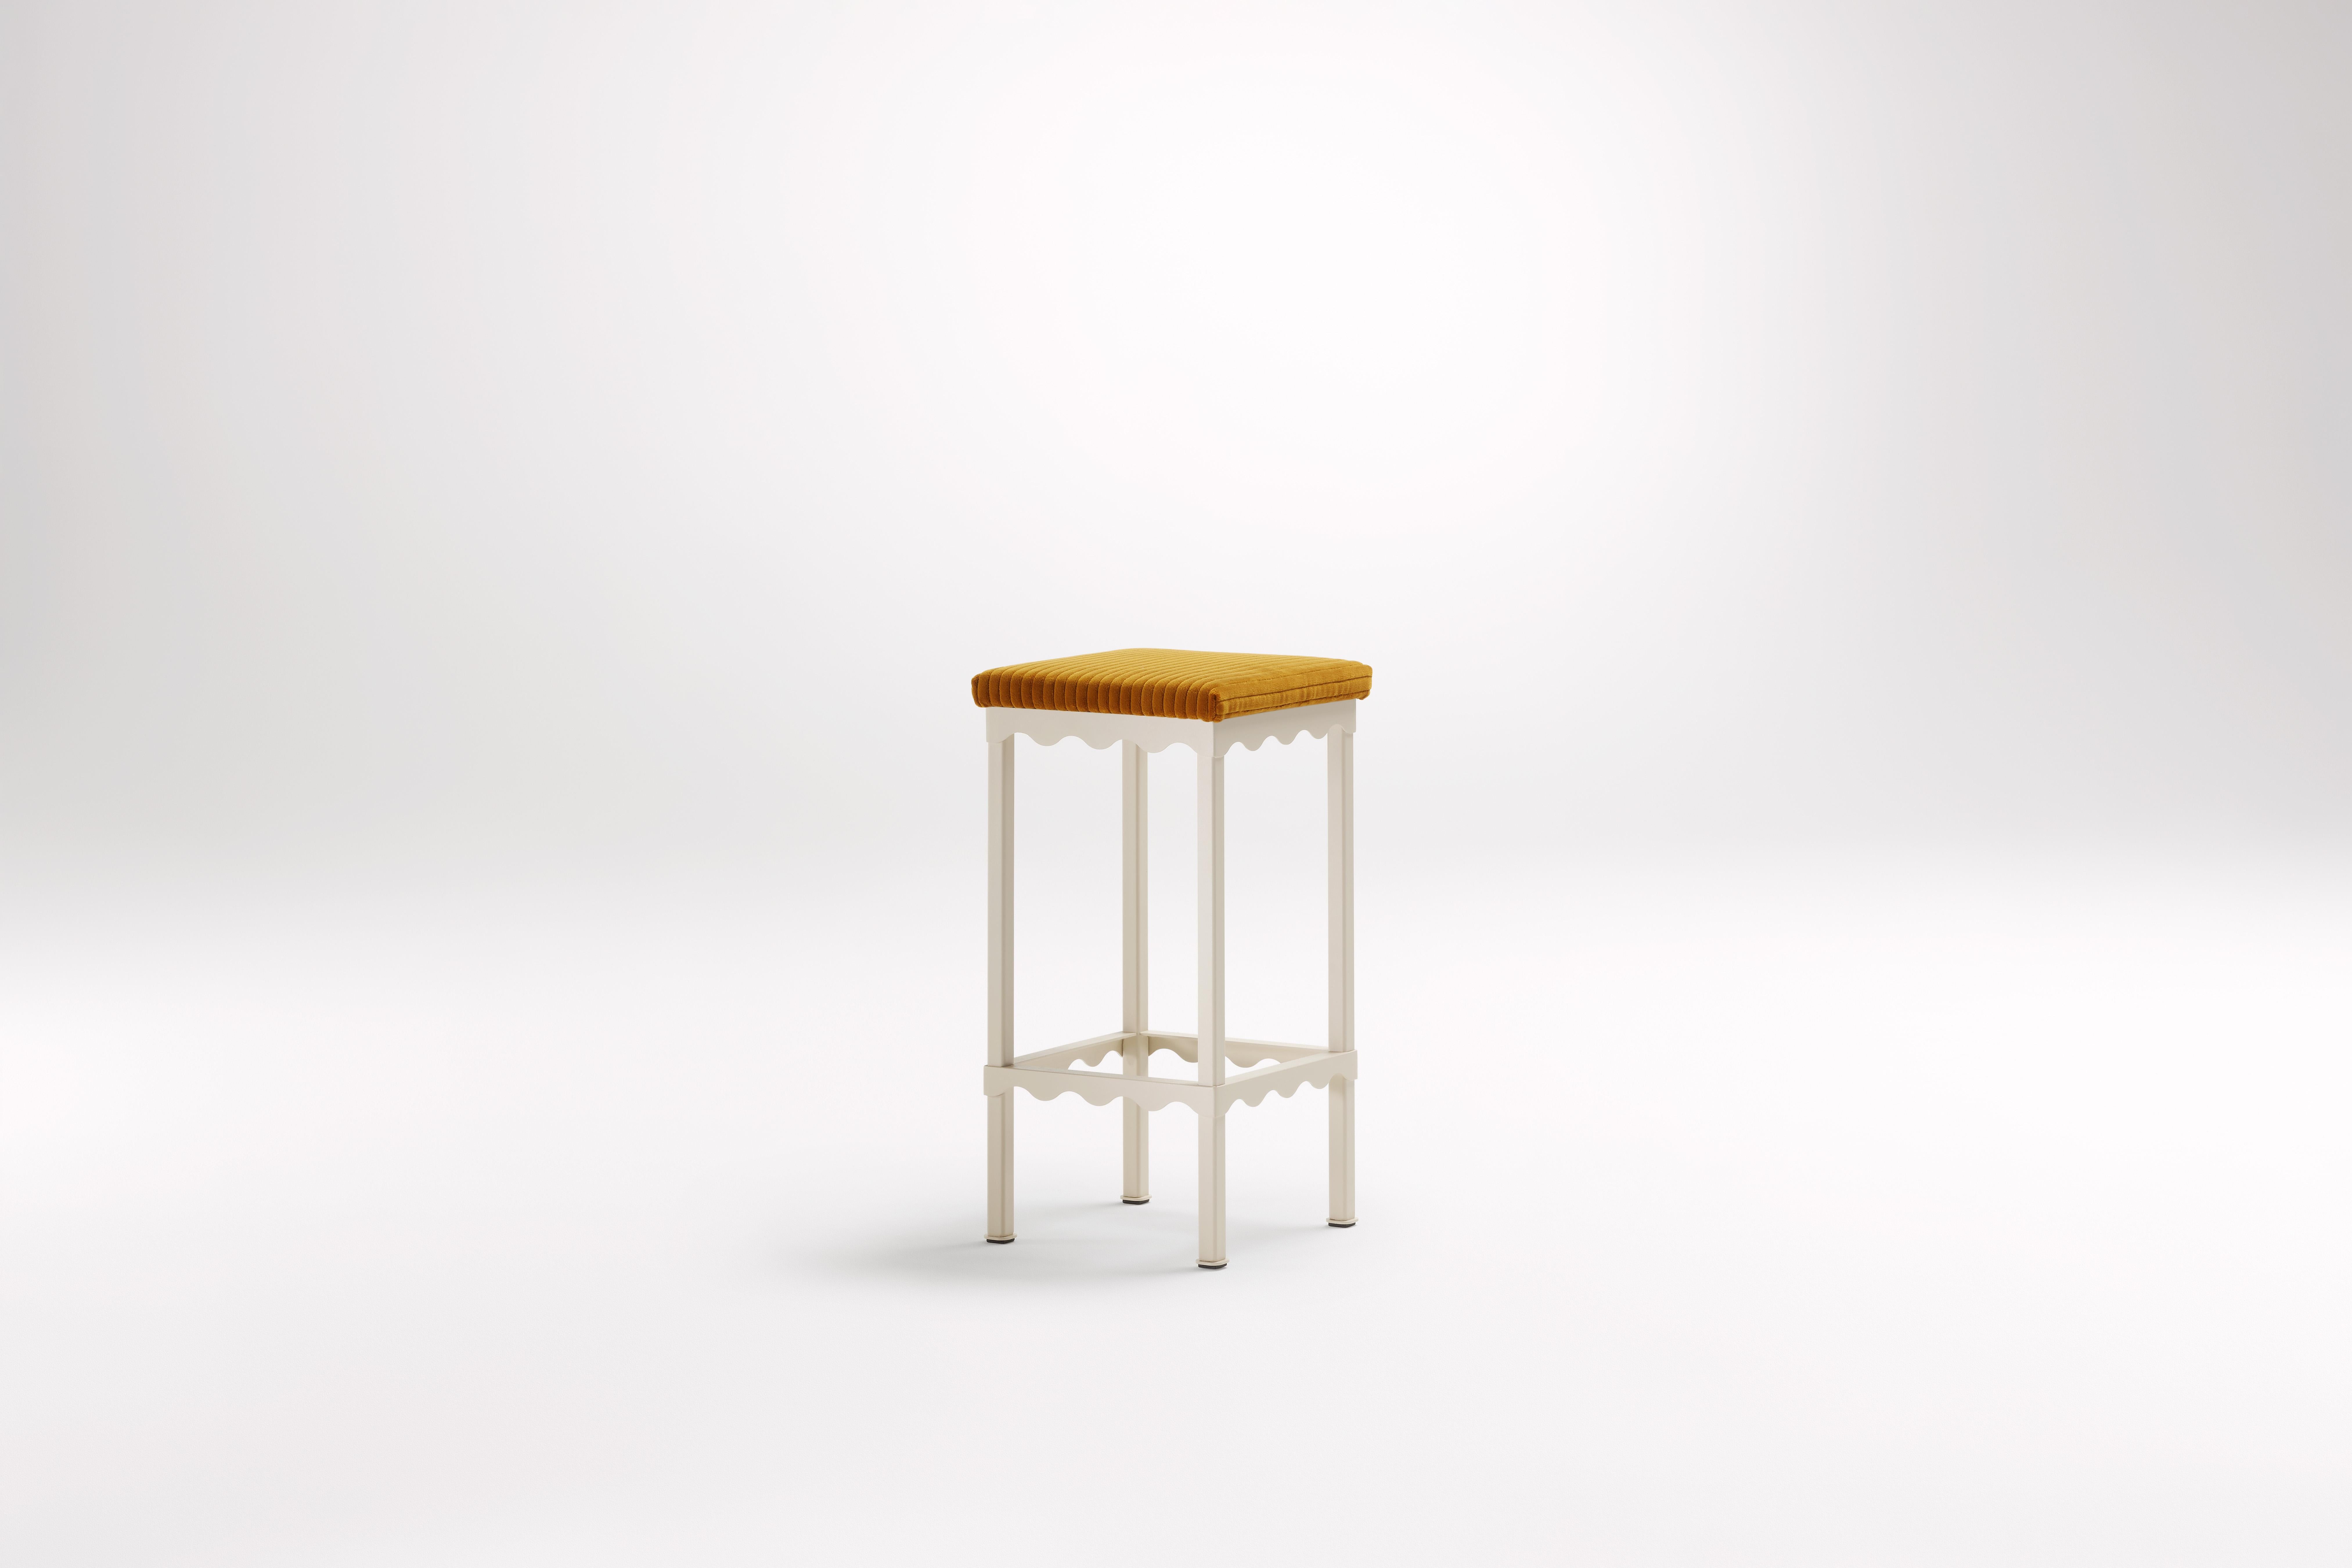 Mikado Bellini High Stool by Coco Flip
Dimensions: D 34 x W 34 x H 65/75 cm
Materials: Timber / Stone tops, Powder-coated steel frame. 
Weight: 8kg
Frame Finishes: Textura Paperbark.

Coco Flip is a Melbourne based furniture and lighting design